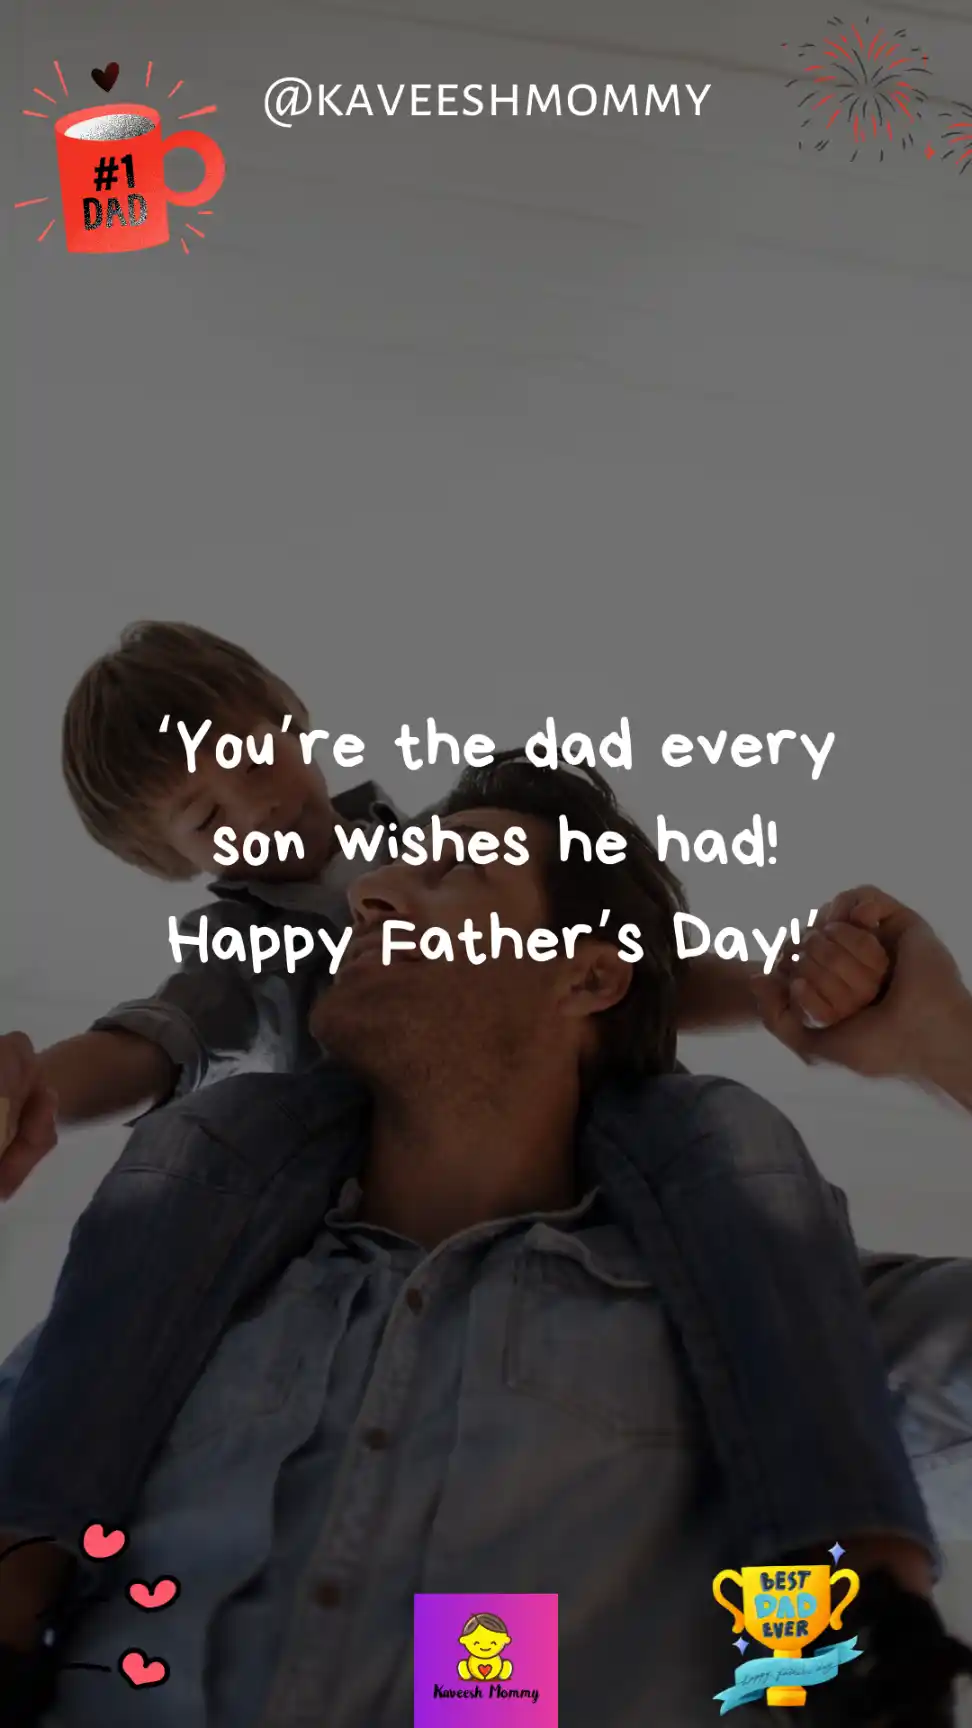 fathers day message son to dad-You’re the dad every son wishes he had! Happy Father’s Day!’